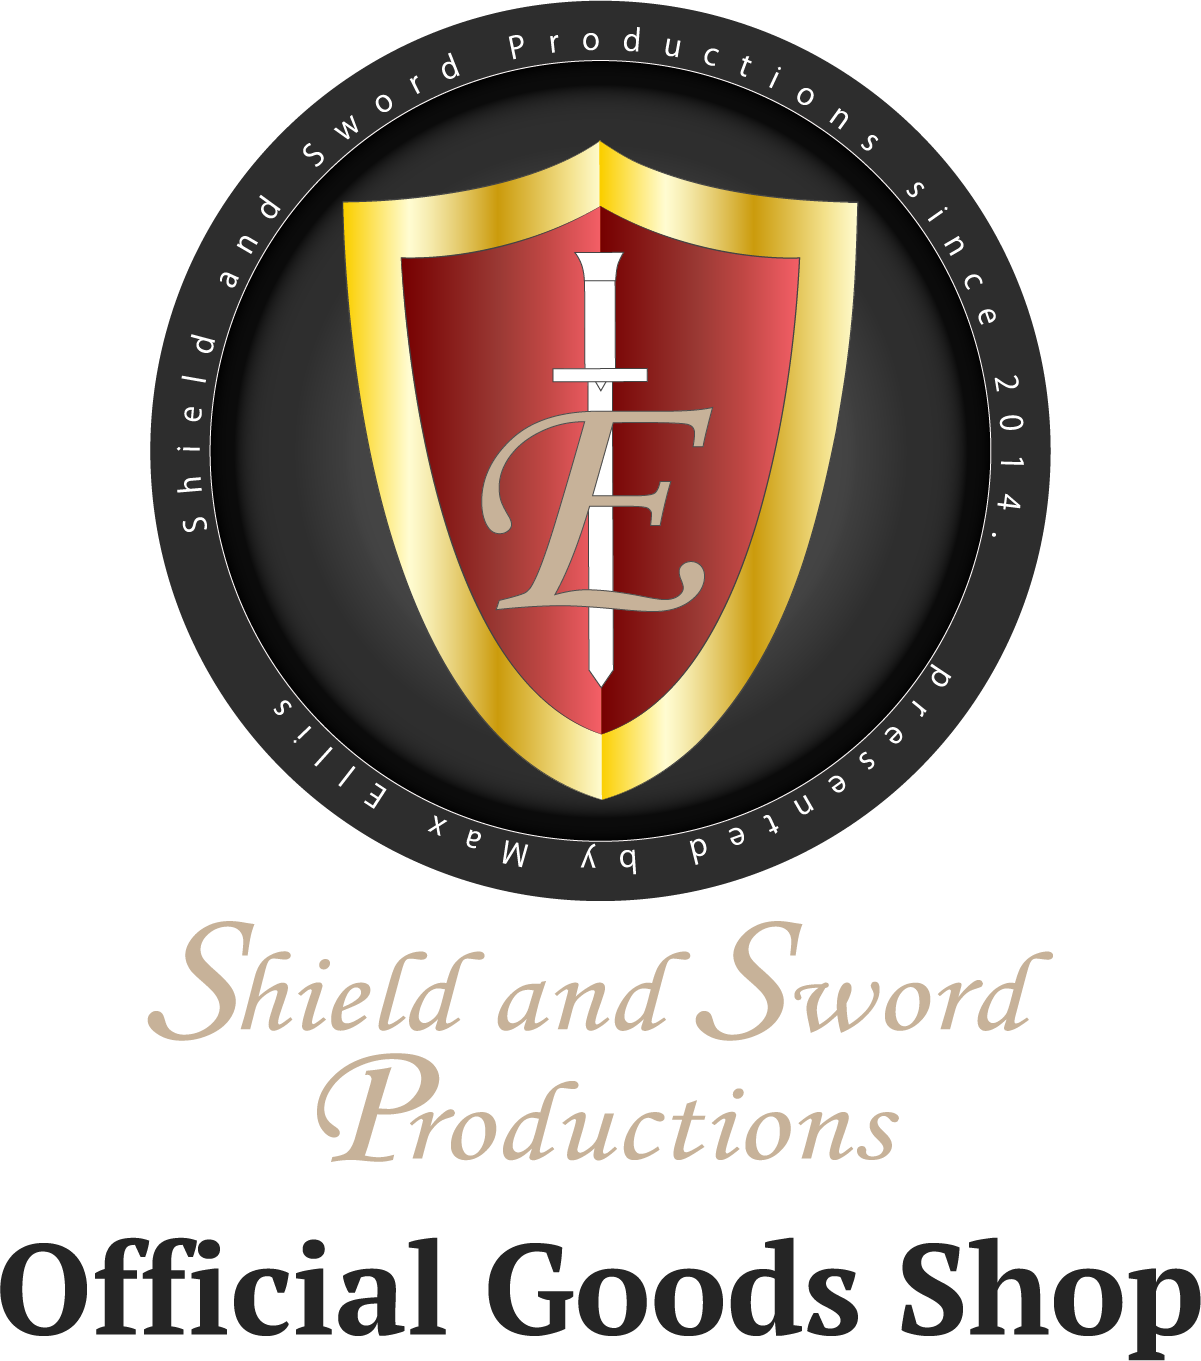 Shield and Sword Productions Goods Shop